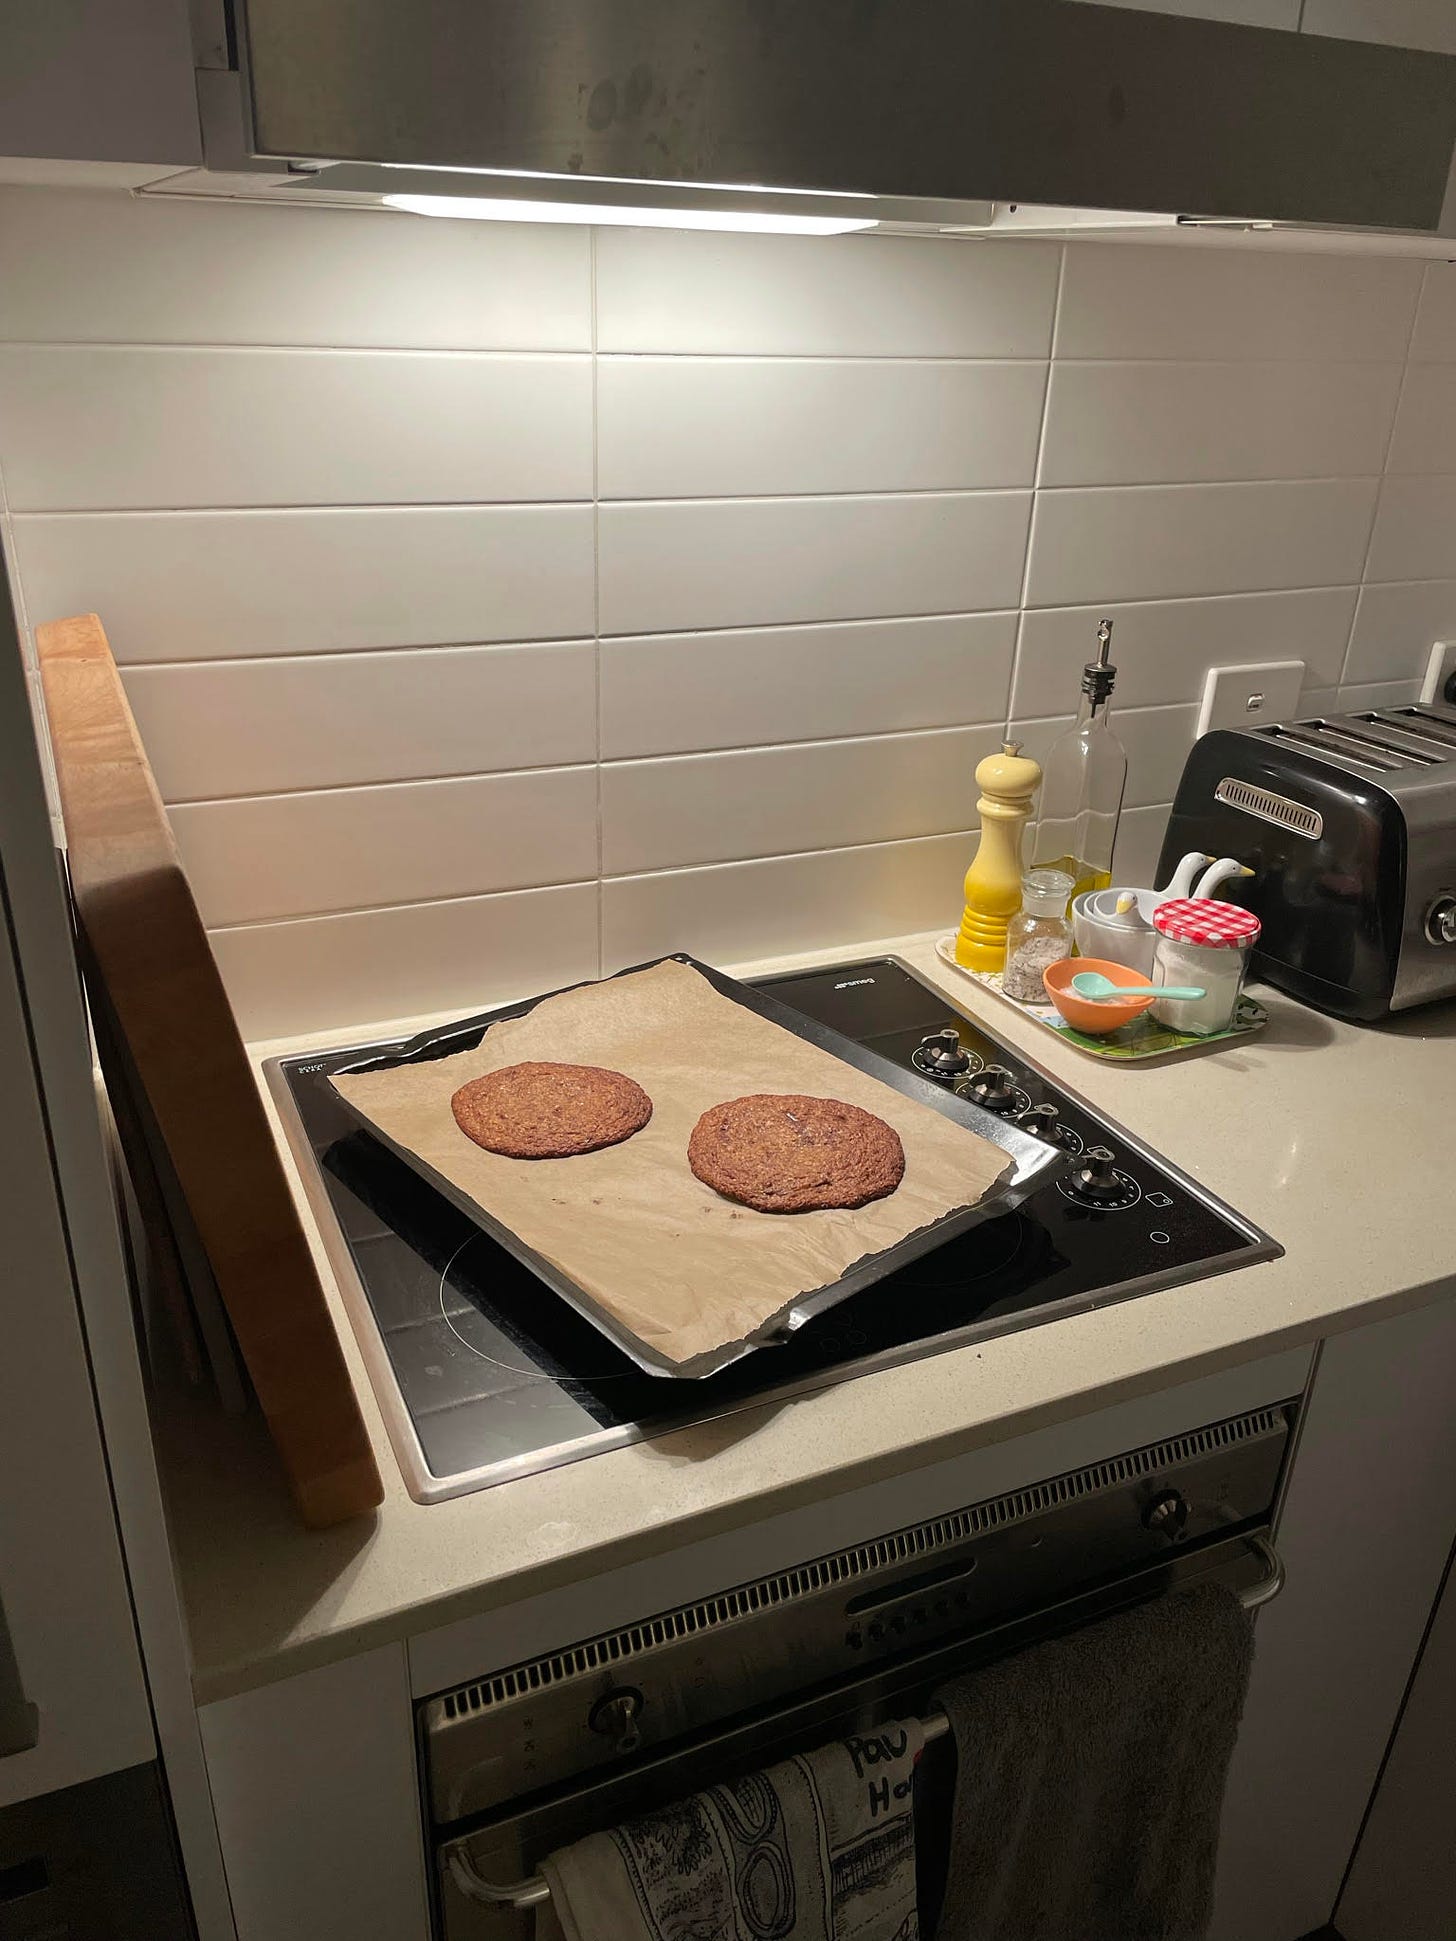 Two giant choc chip cookies on a baking tray, cooling on a stove at night.